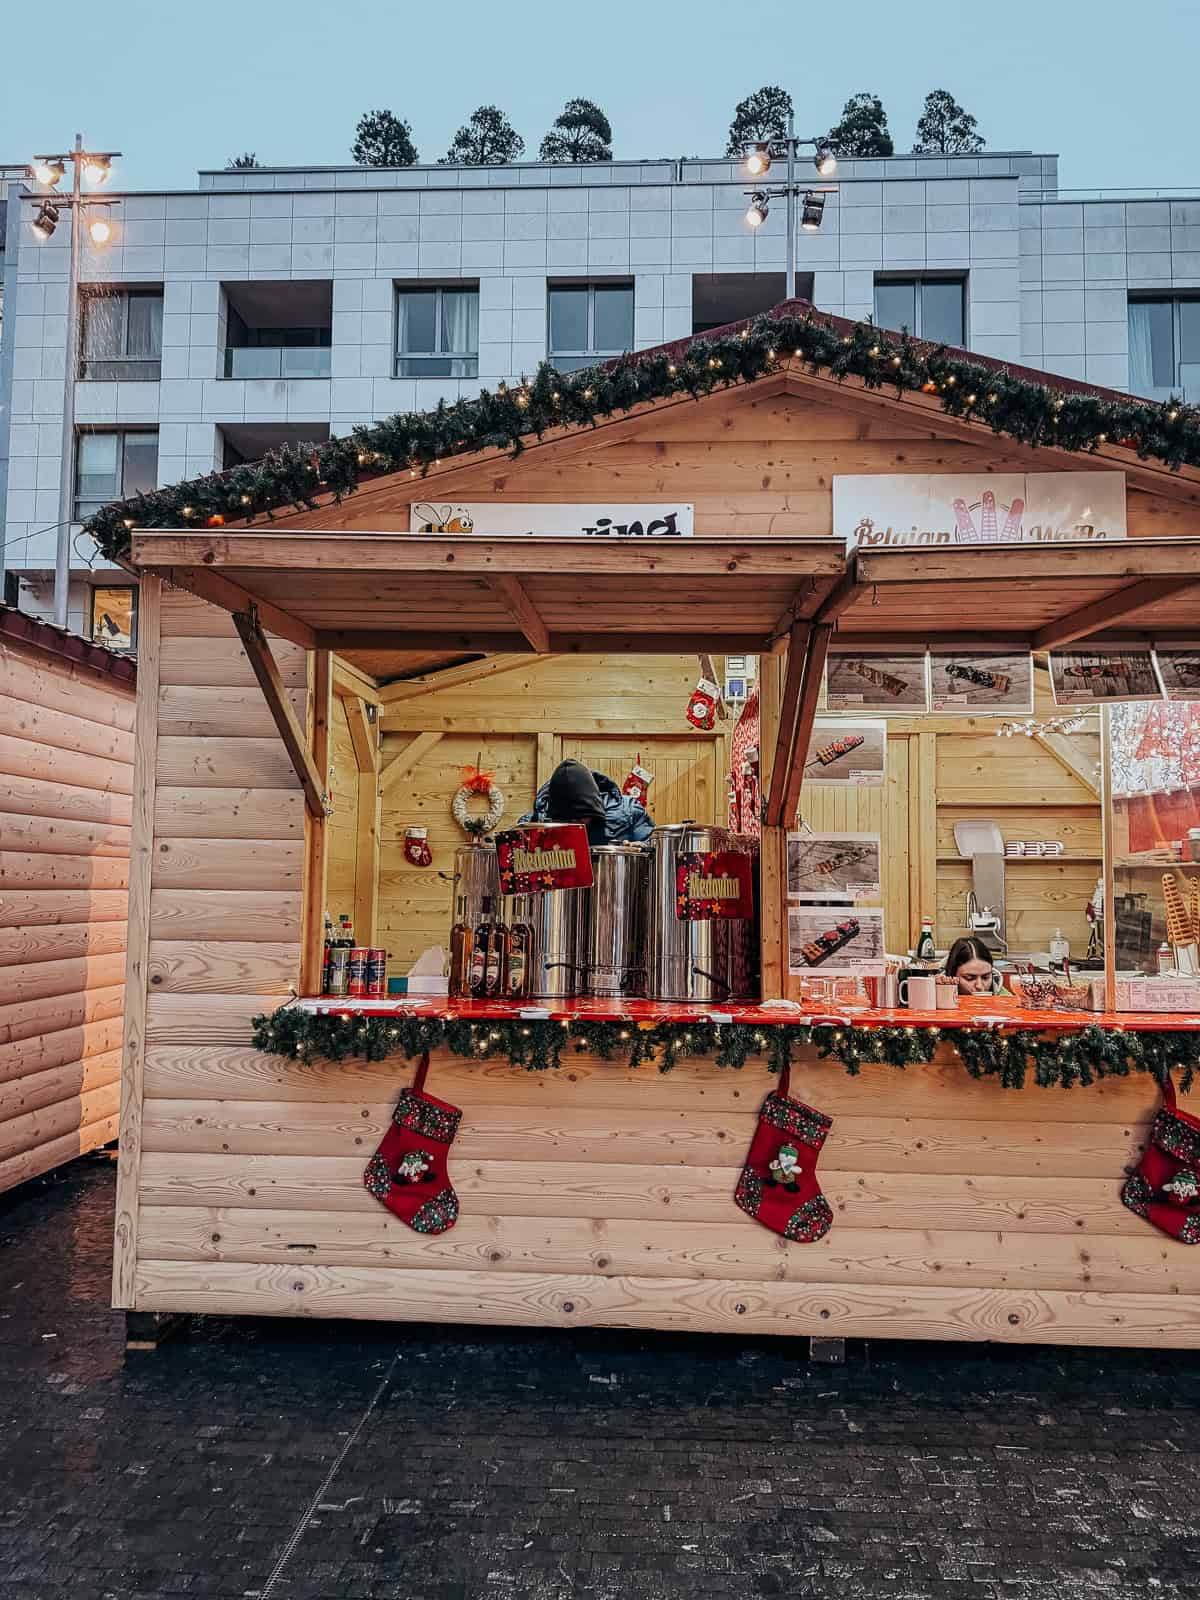 A decorated Christmas market stall selling hot beverages, adorned with festive garlands and stockings, under the soft glow of string lights.